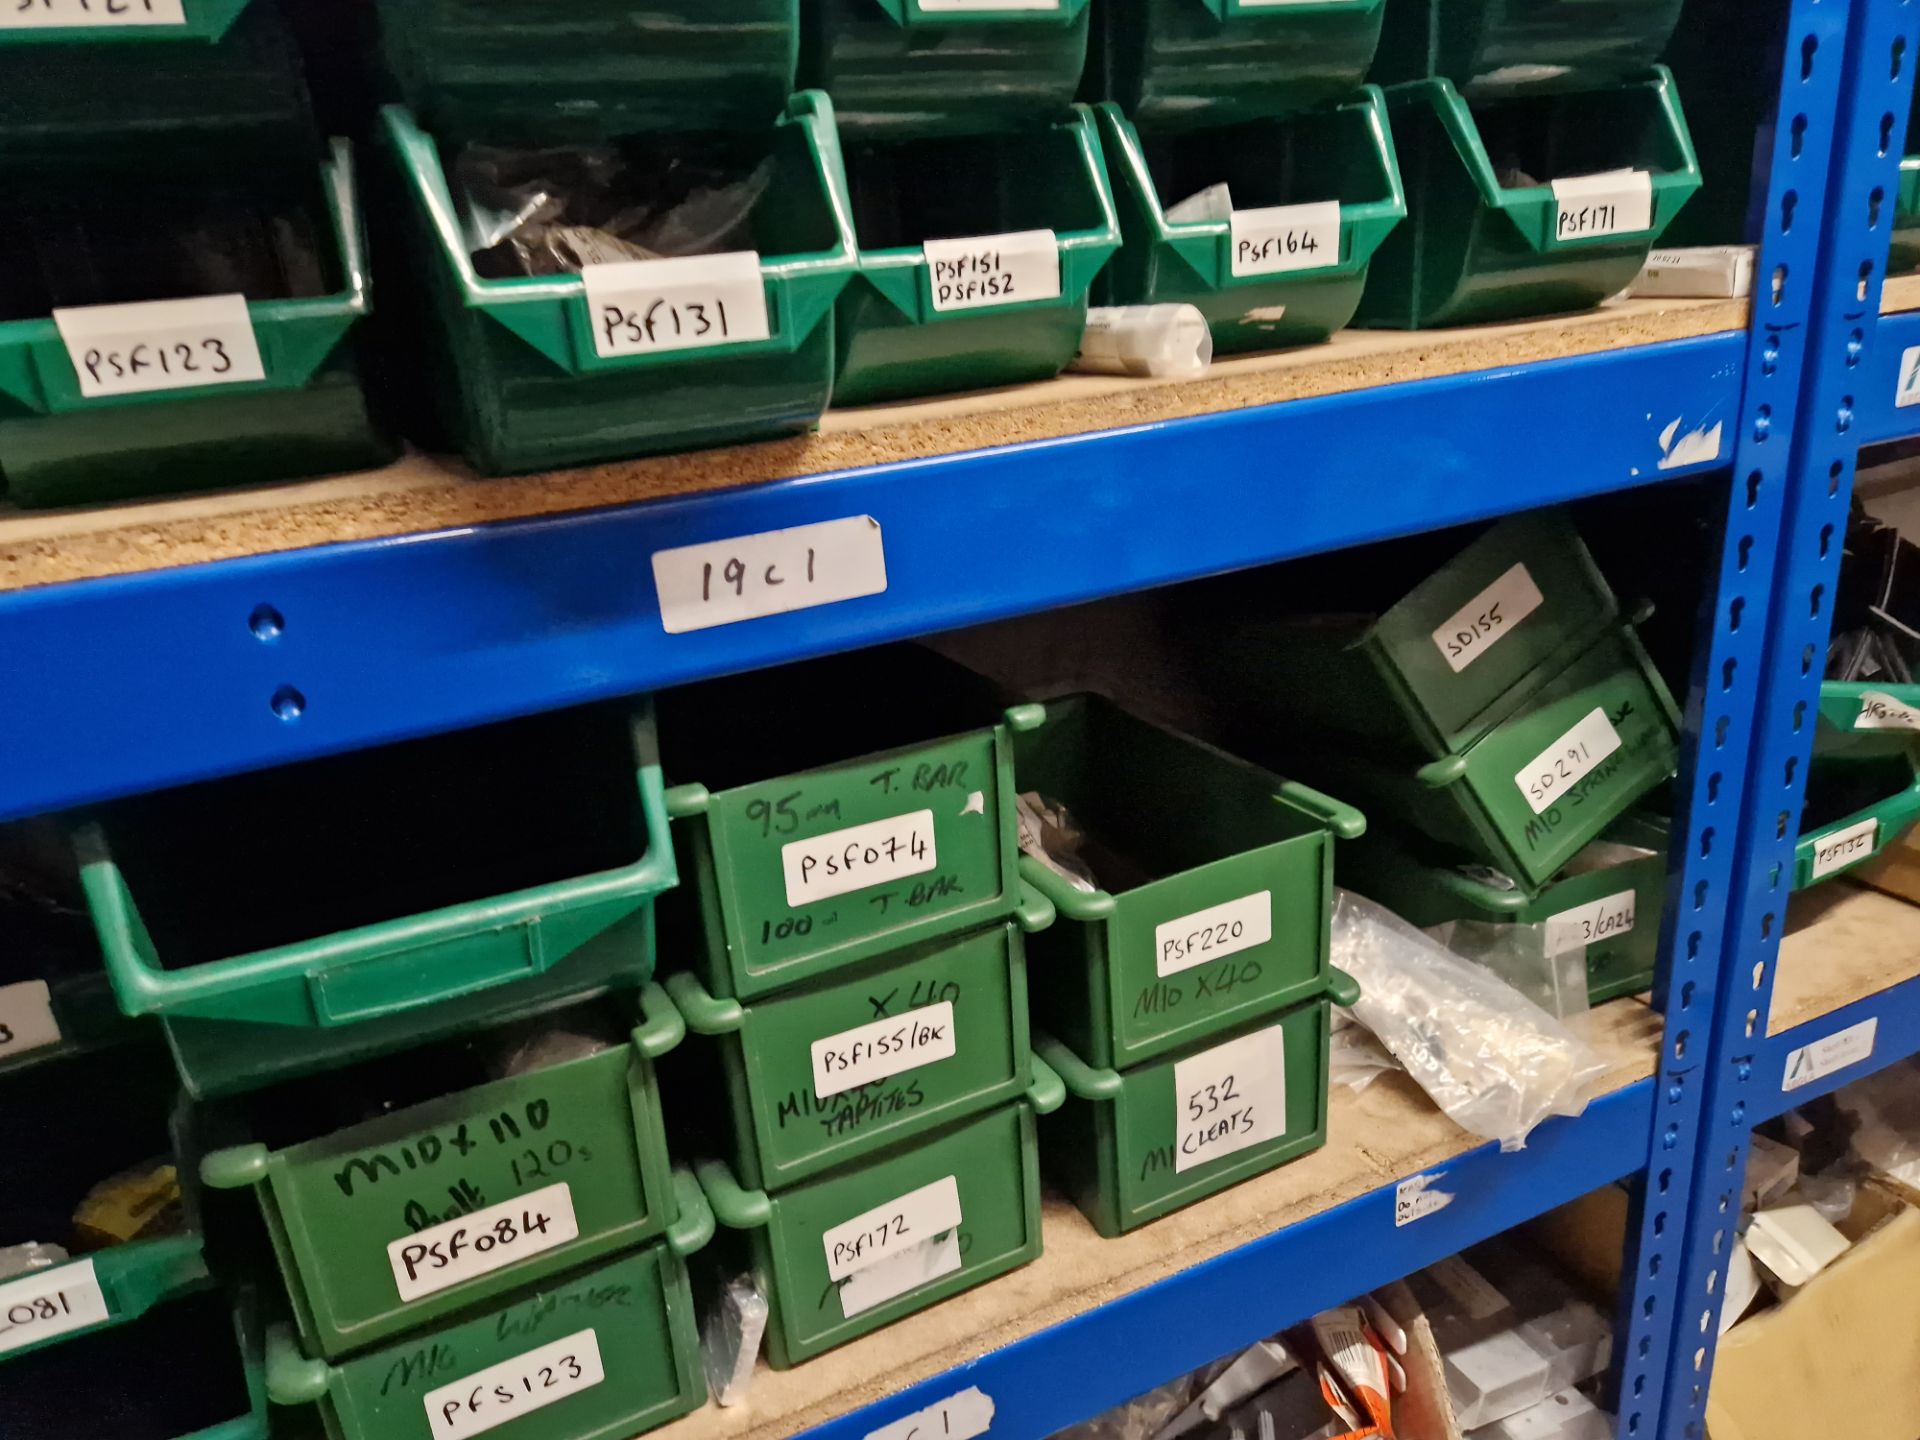 Contents to Two Bays of Shelving, including Rubber Gaskets, Aluminium Profile, End Caps, Screws, - Image 6 of 11